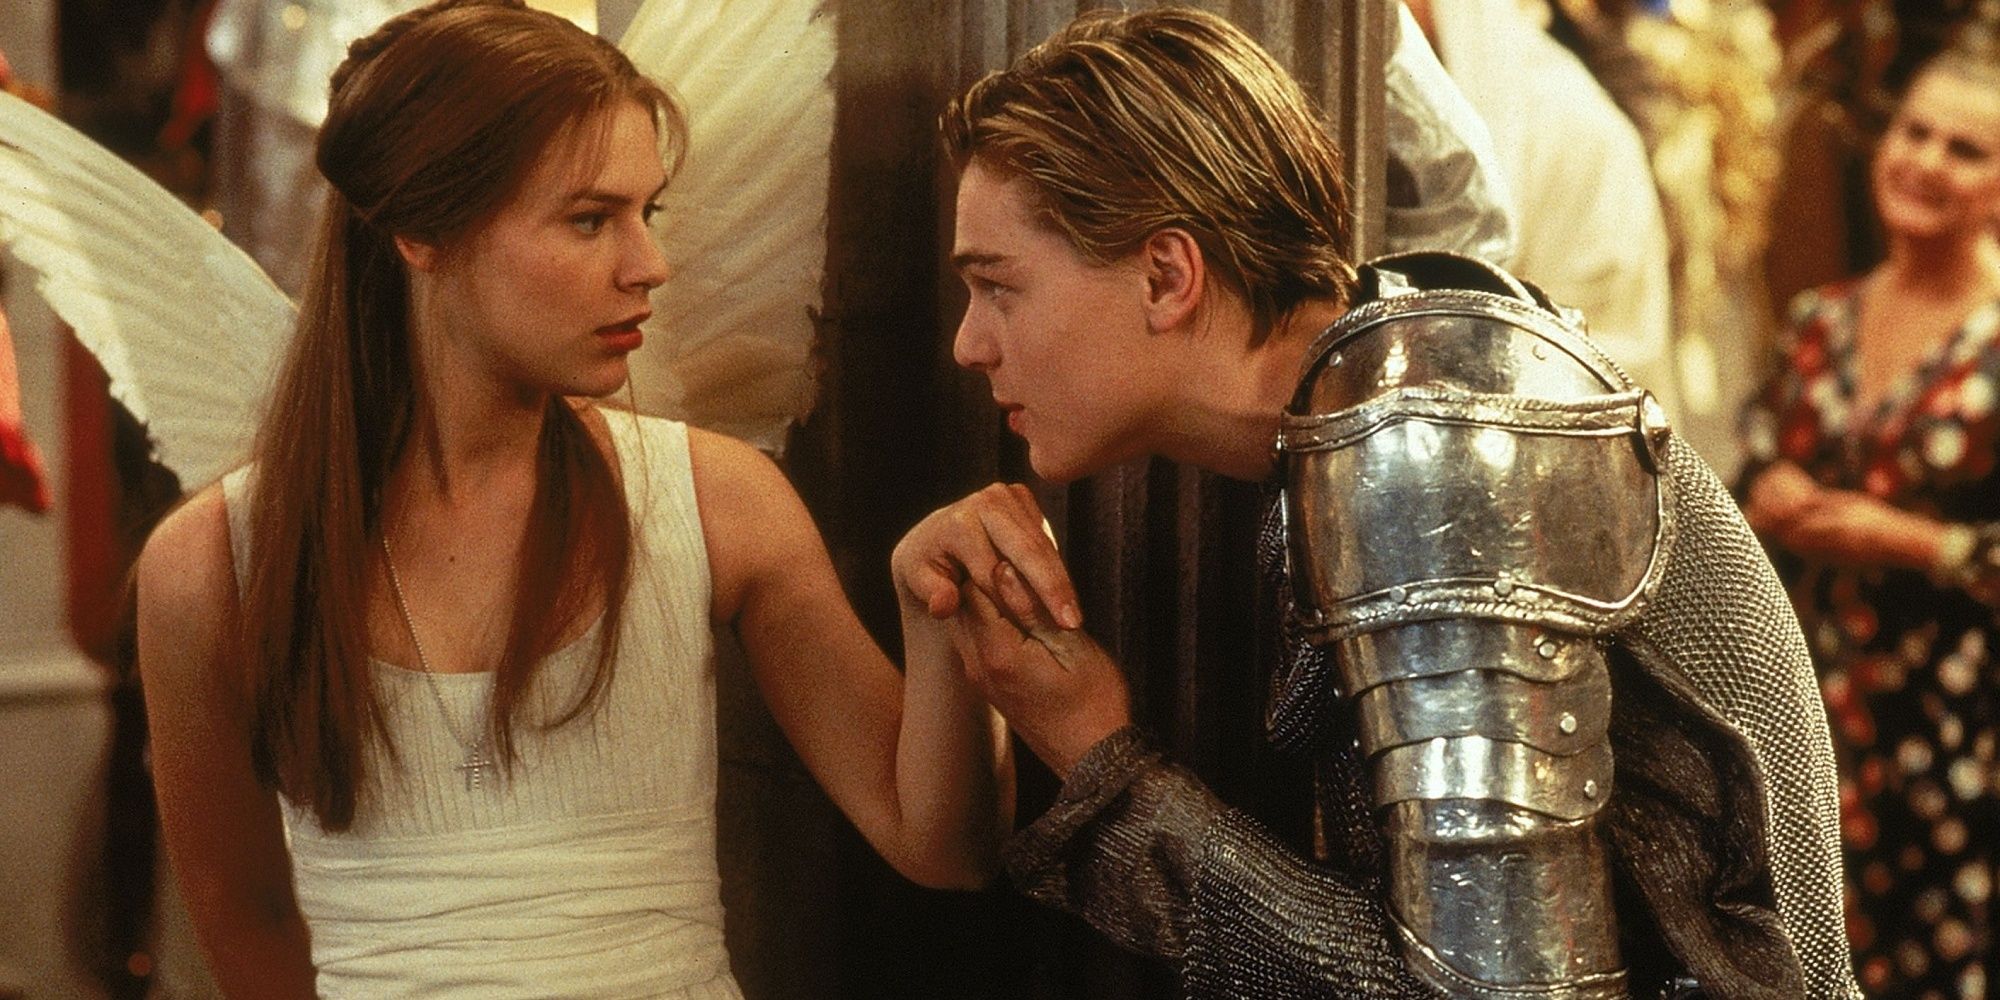 Romeo in a knight costume kissing the hand of Juliet, who is in an angel costume.